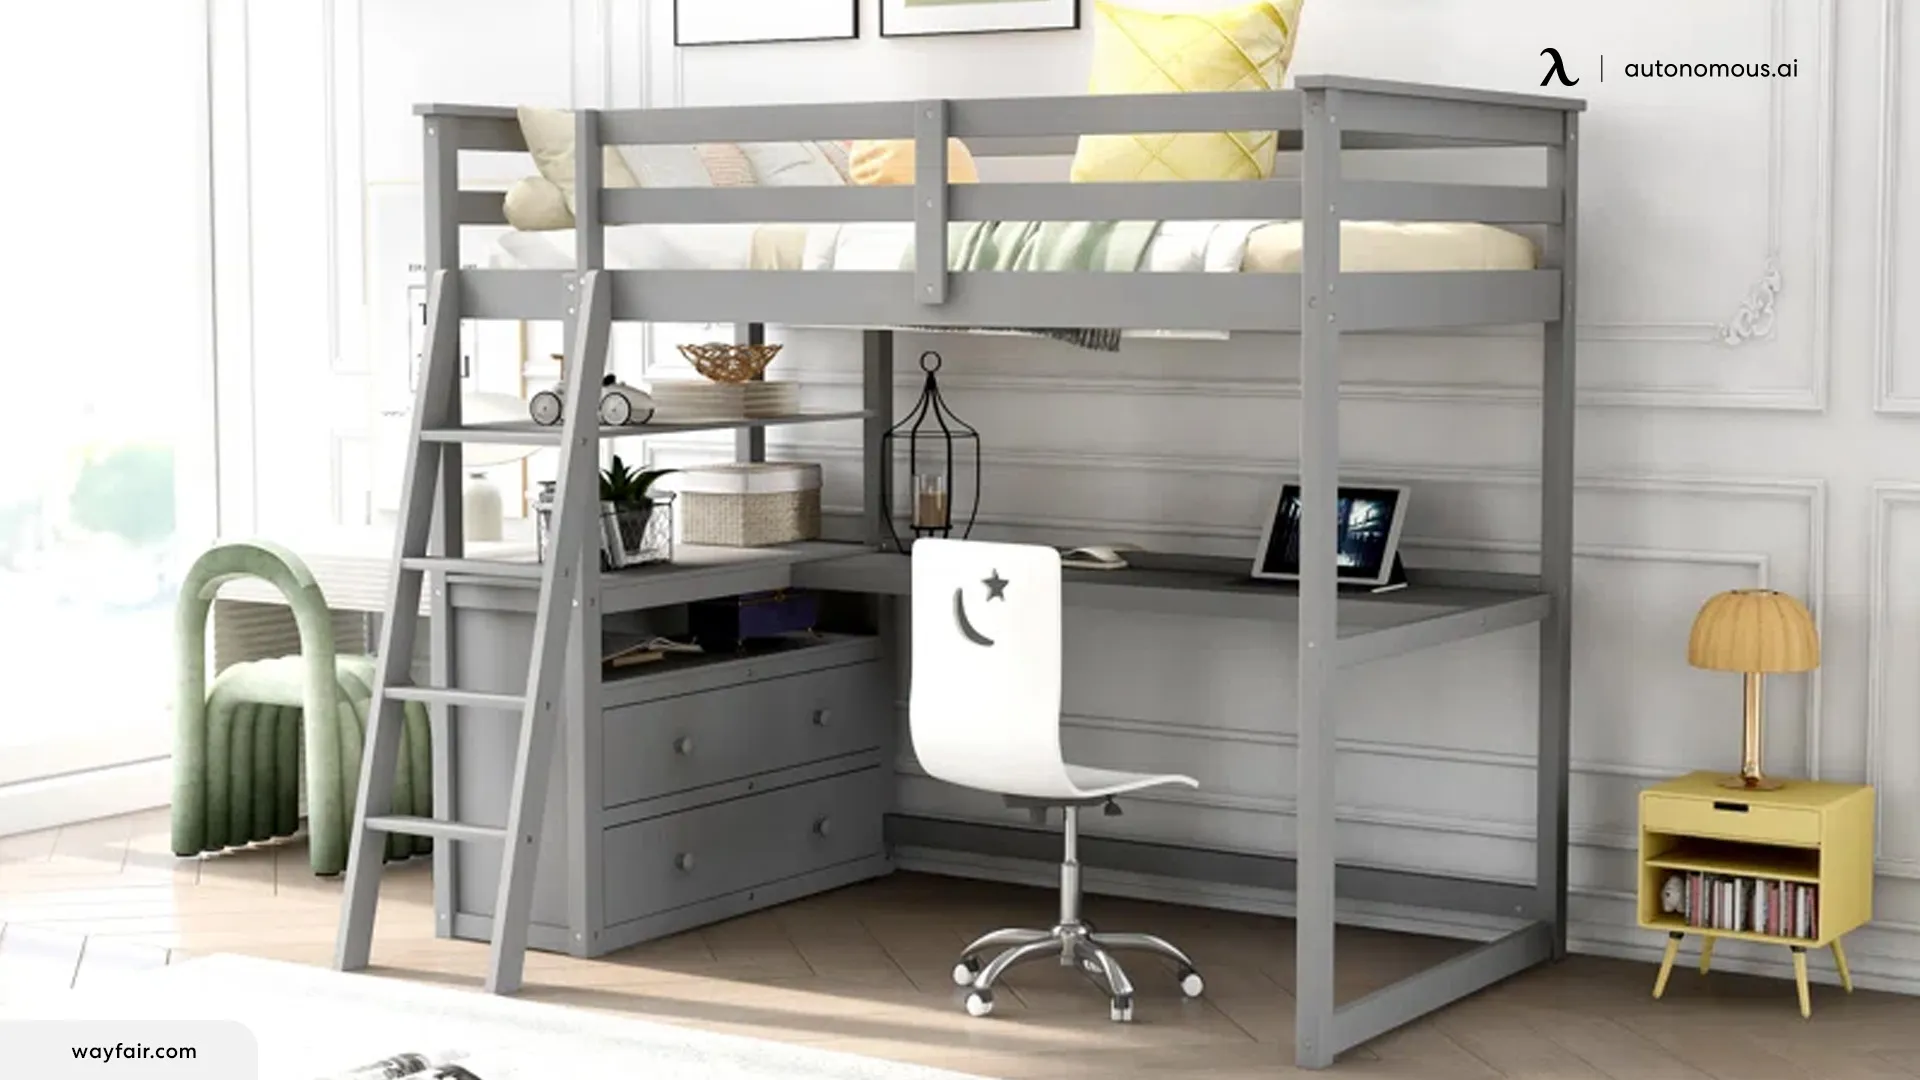 Loft Beds with Built-in Workstations or Storage Underneath